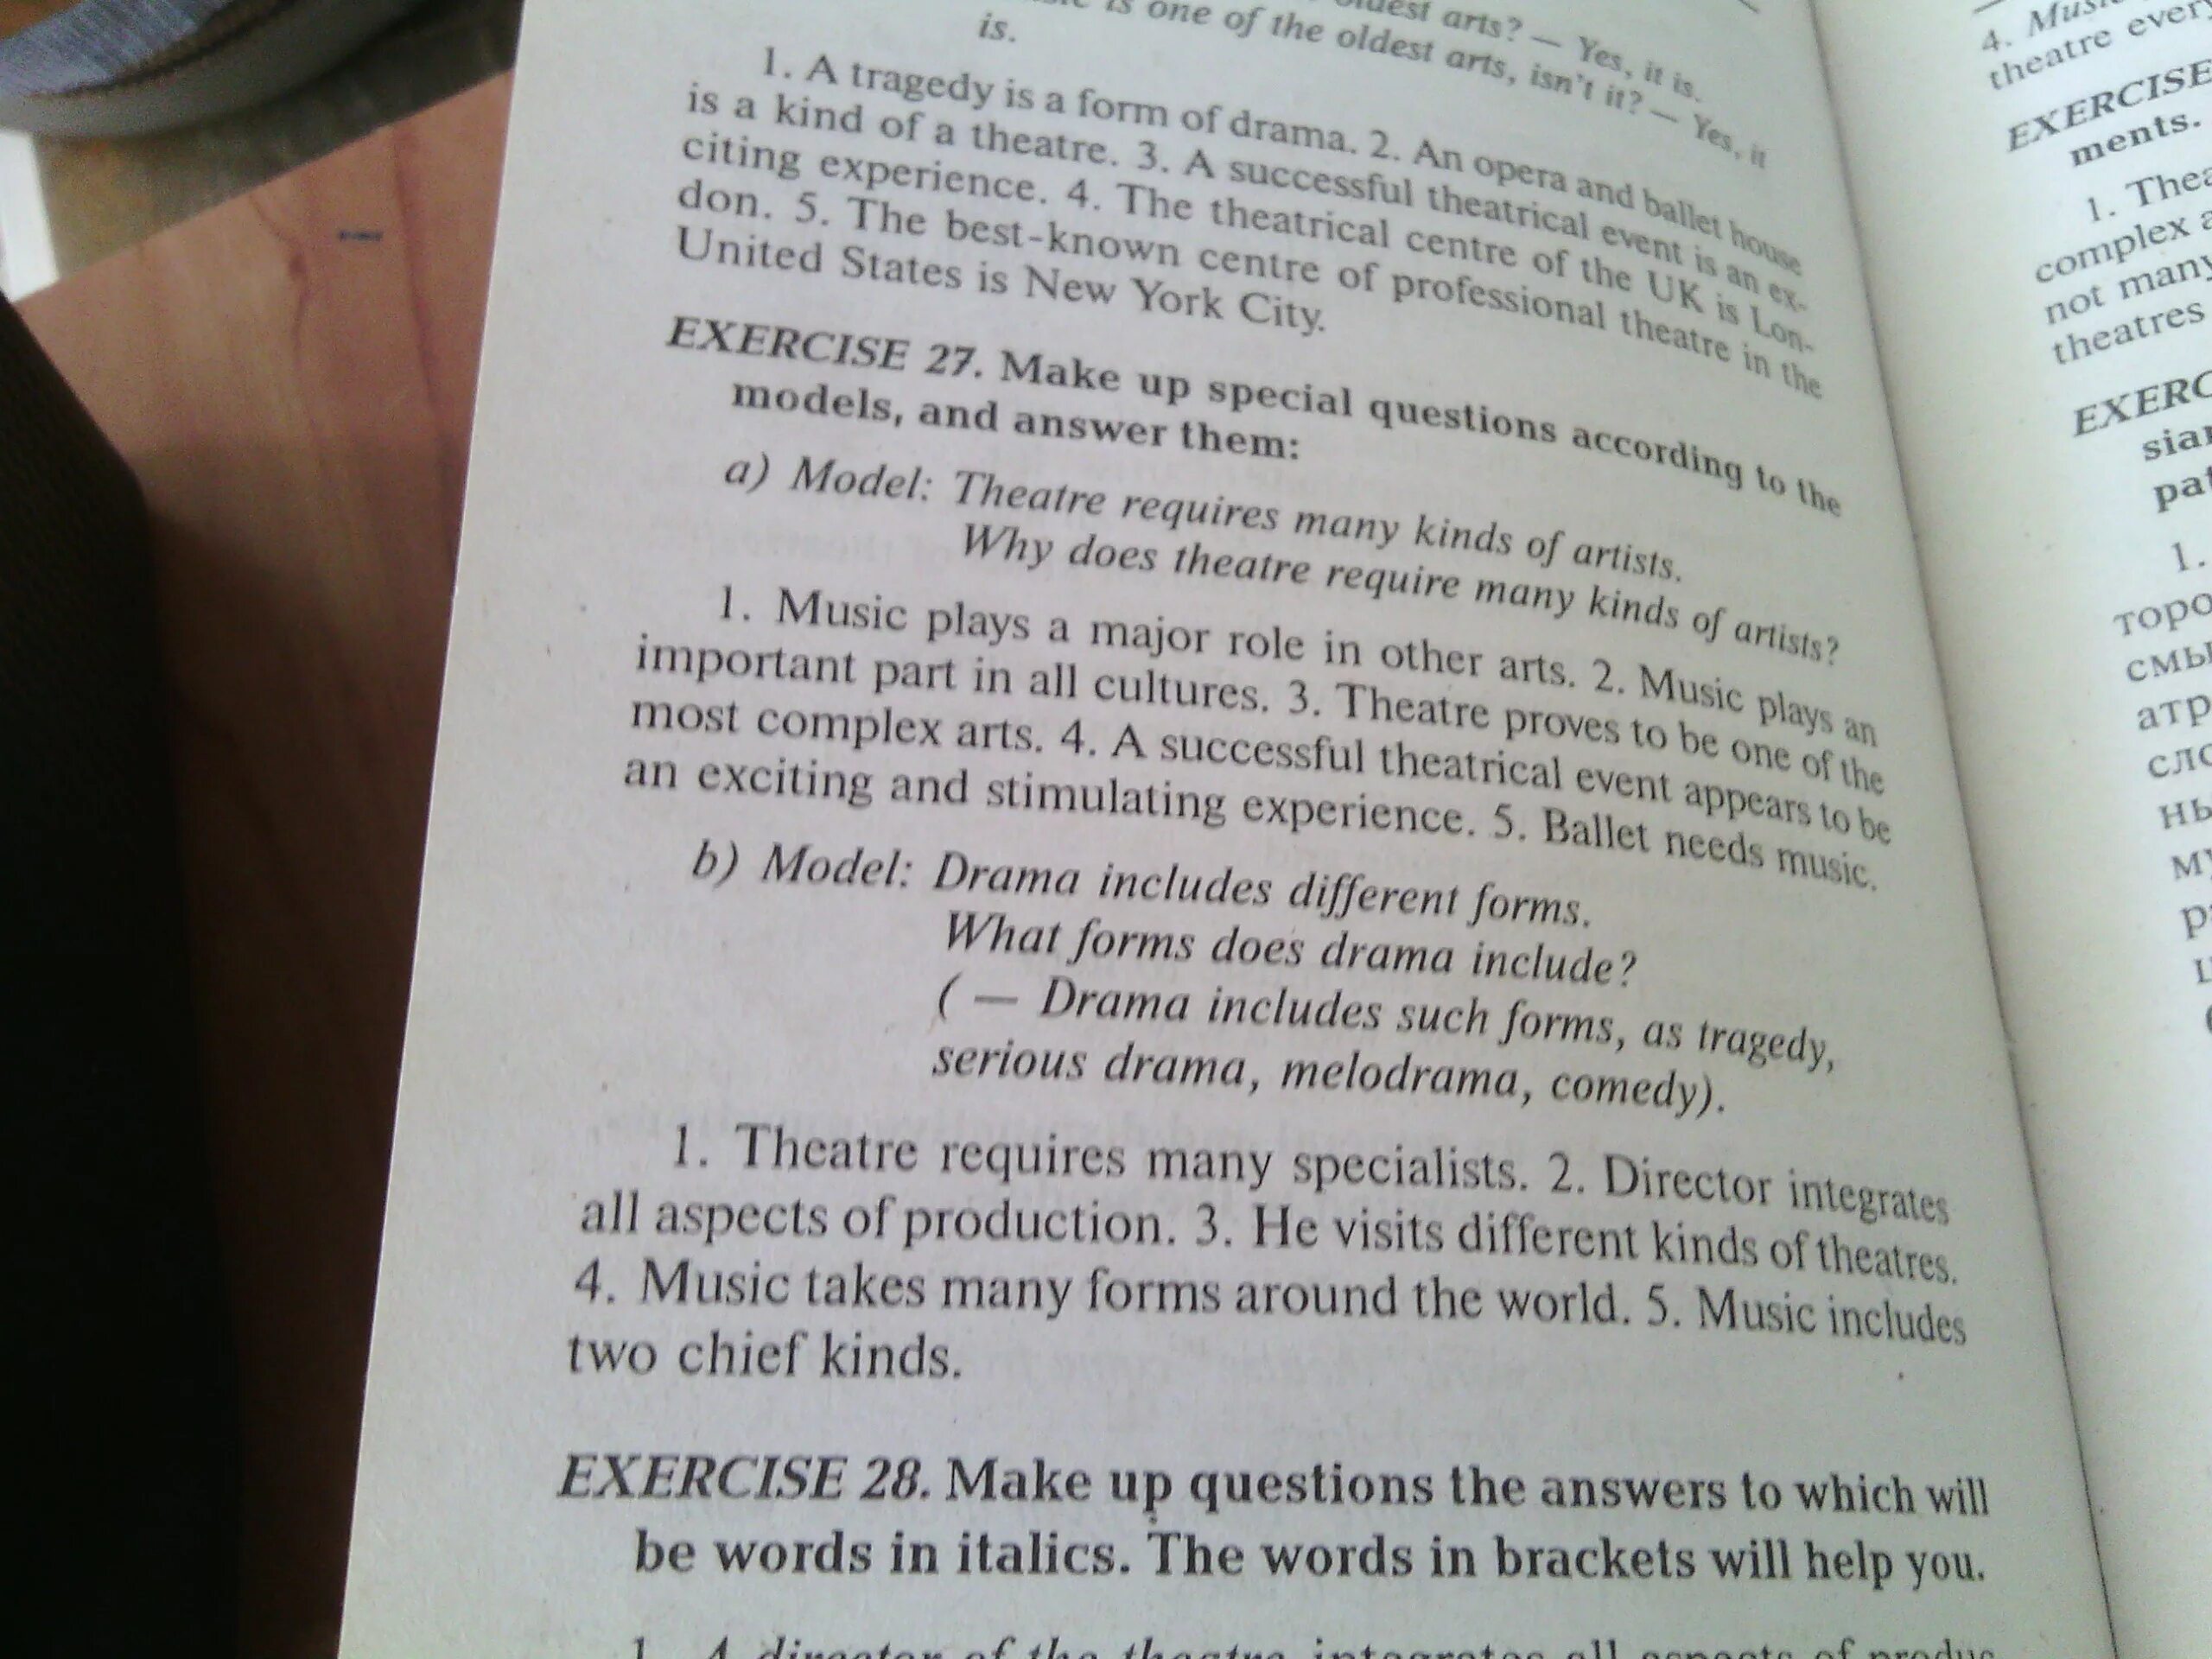 Make up questions to the answers. Make up questions the answers to which will be Words in italics.